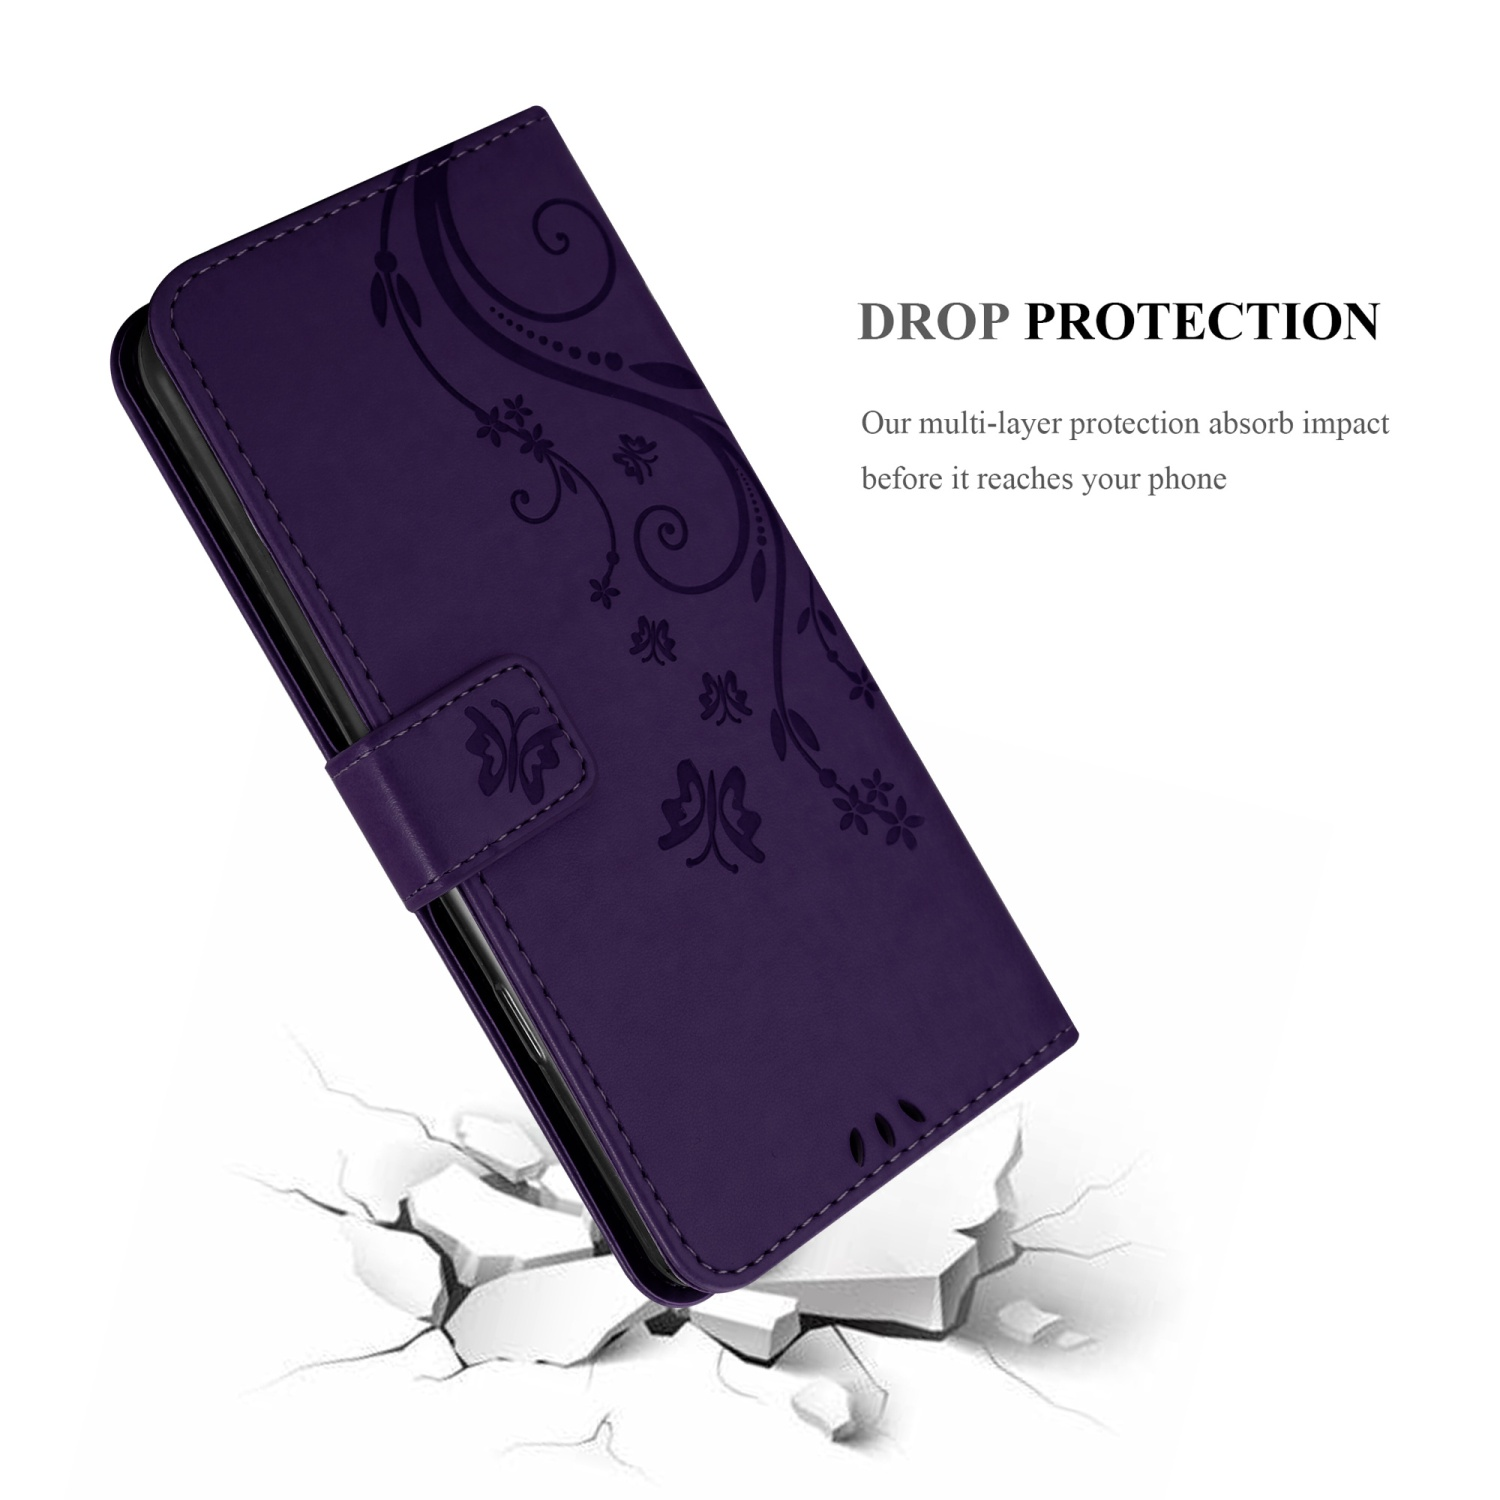 Hülle Sony, Muster DUNKEL Xperia Bookcover, COMPACT, Case, XZ1 CADORABO Flower FLORAL Blumen LILA